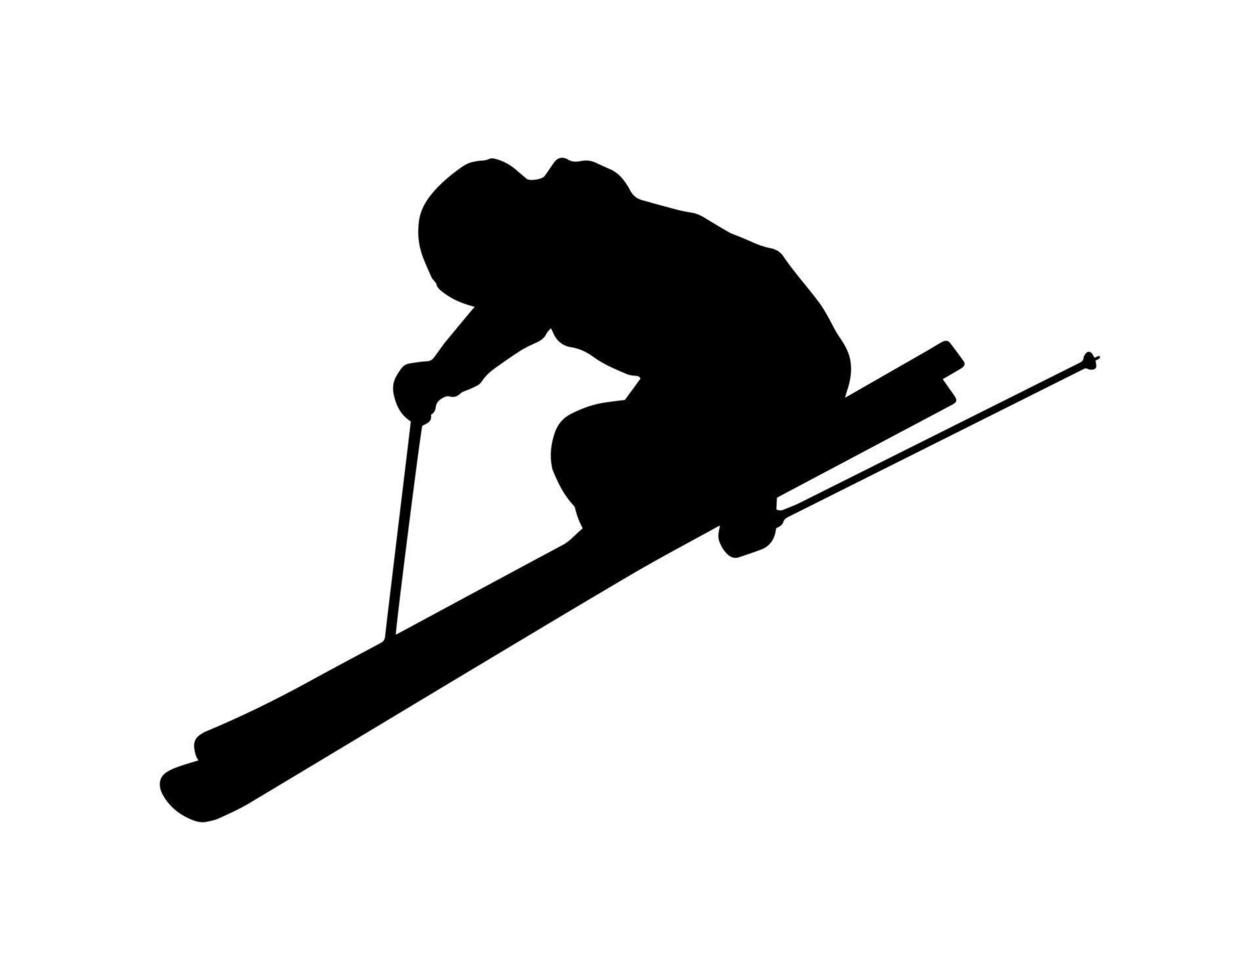 Vector simple skiing person silhouette shadow shape, flat black icon isolated on white backround. Logo emblem design element. Winter sport game and leisure activity.